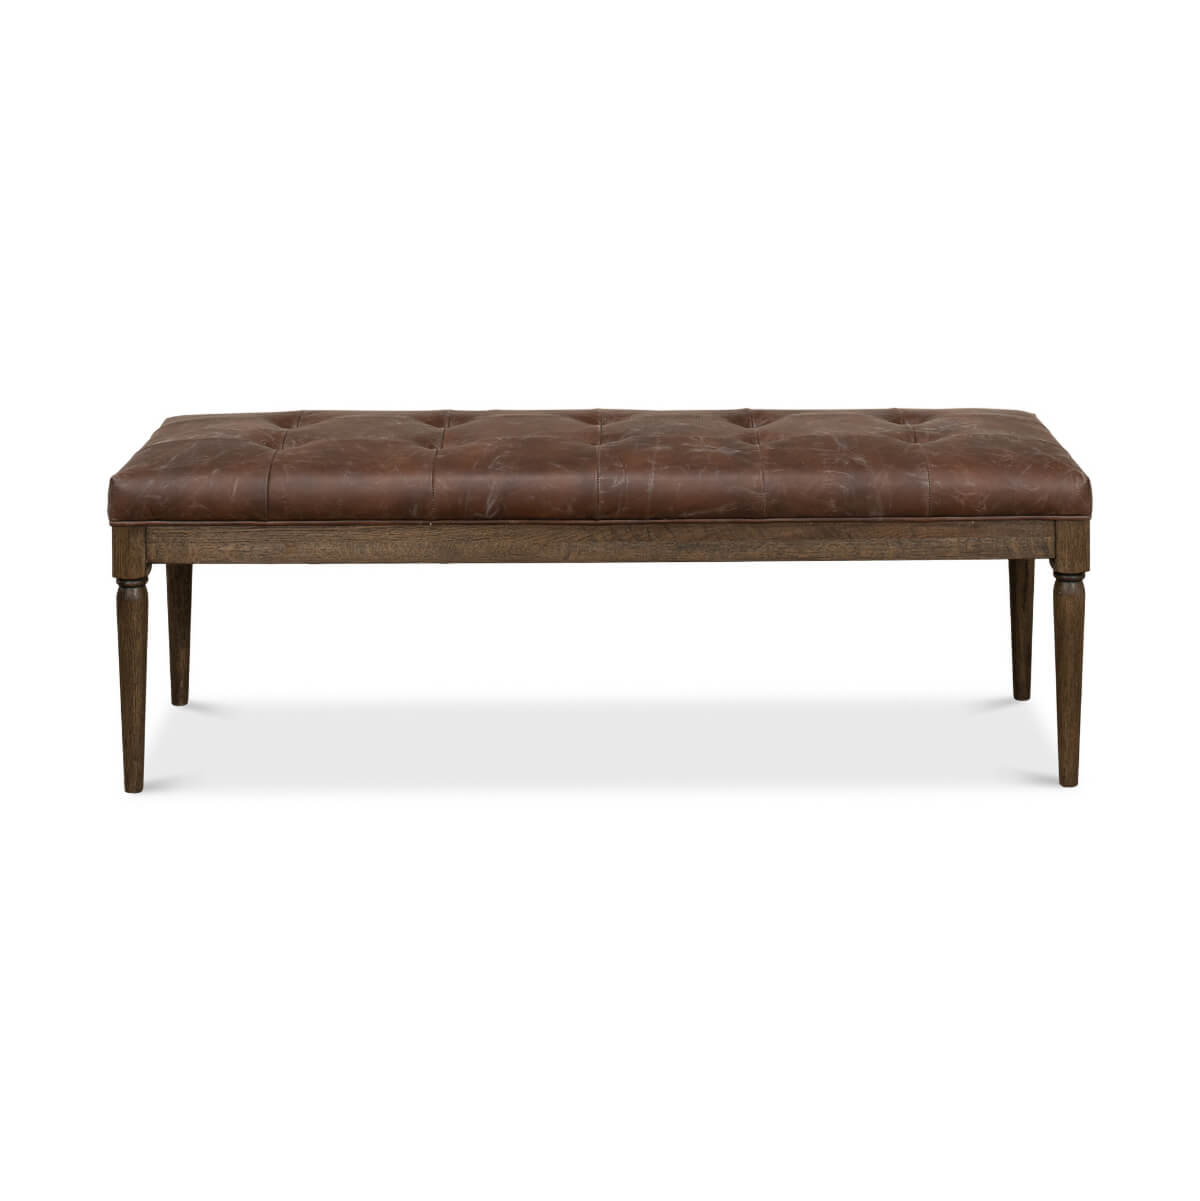 Directoire Style Leather Bench - English Georgian America